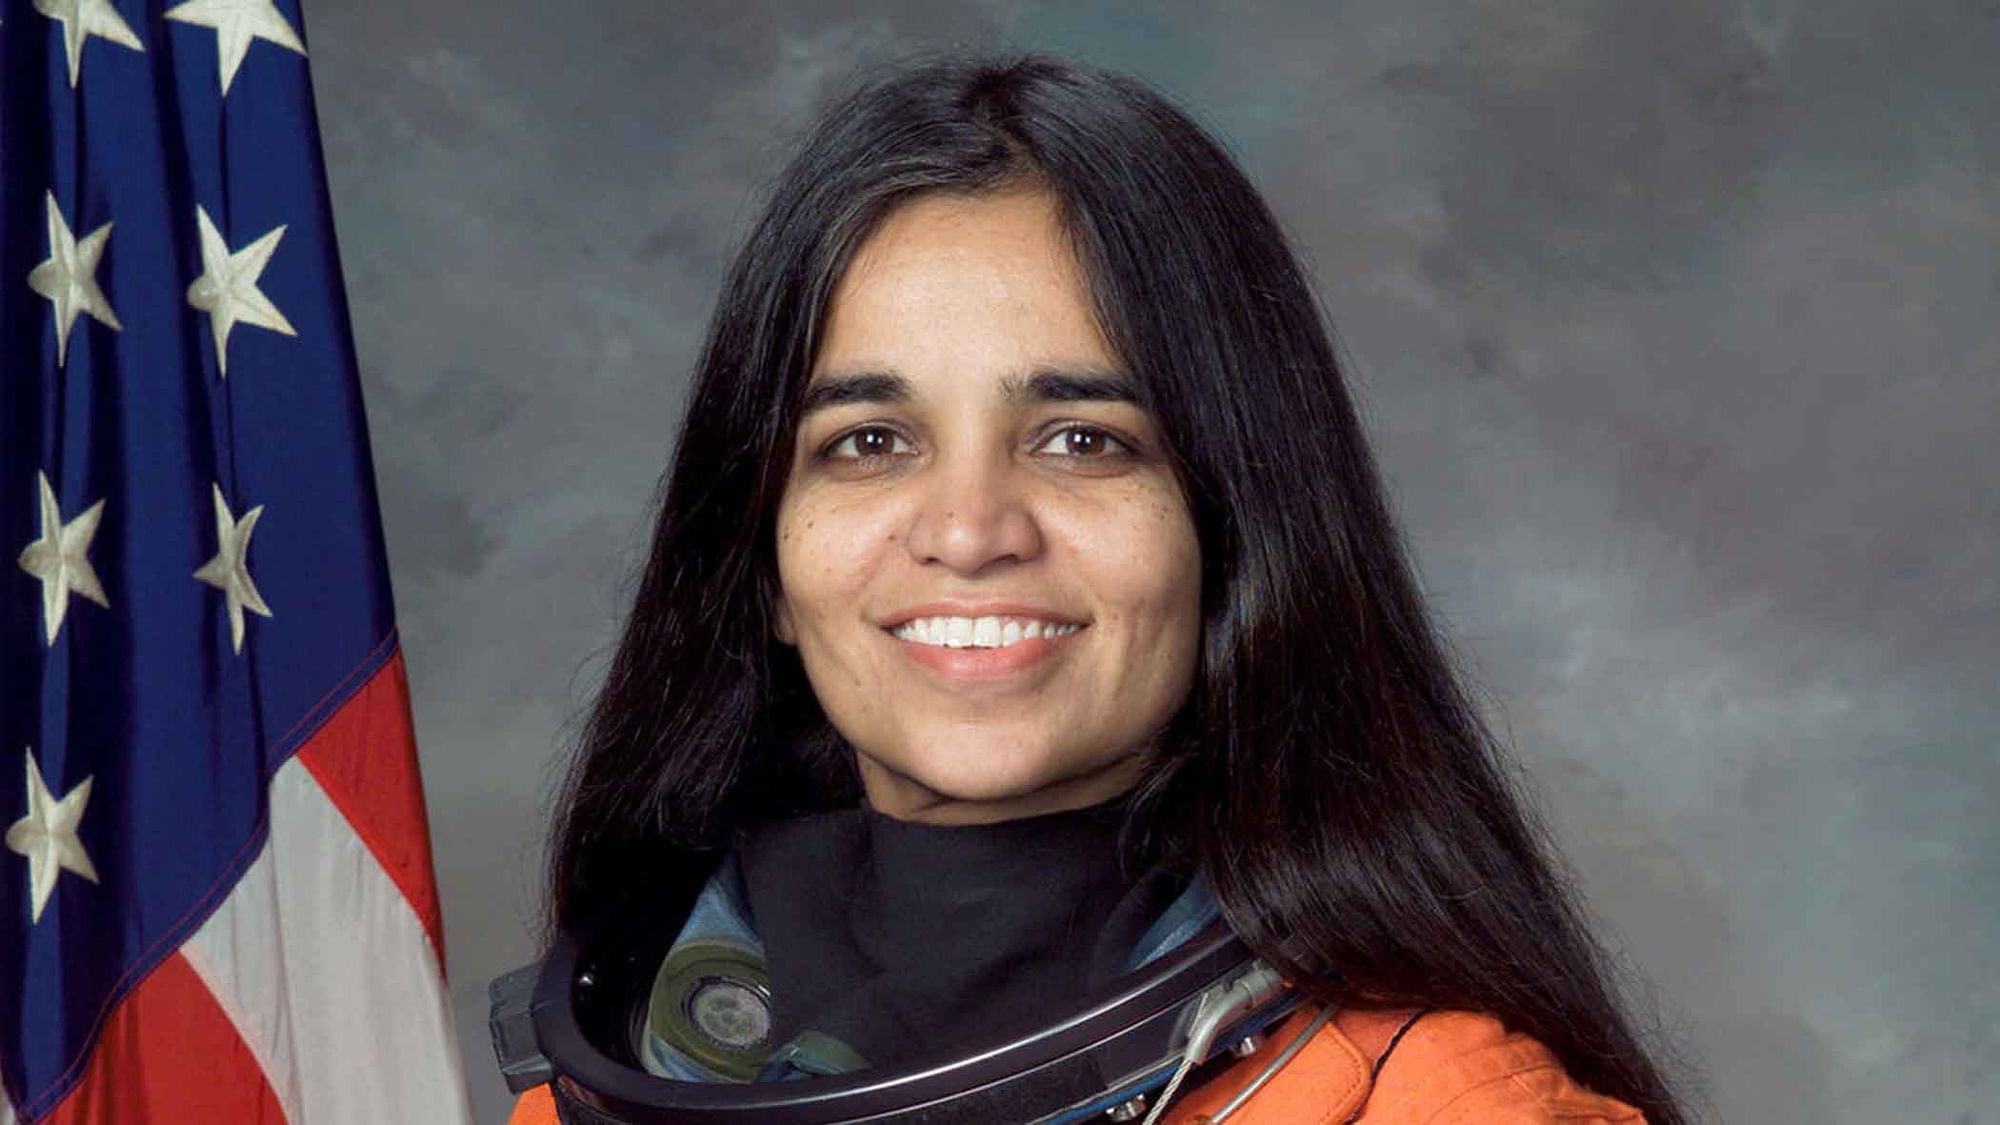 Kalpana Chawla with the crew of Columbia who died in the space shuttle tragedy on 1 February 2003. 